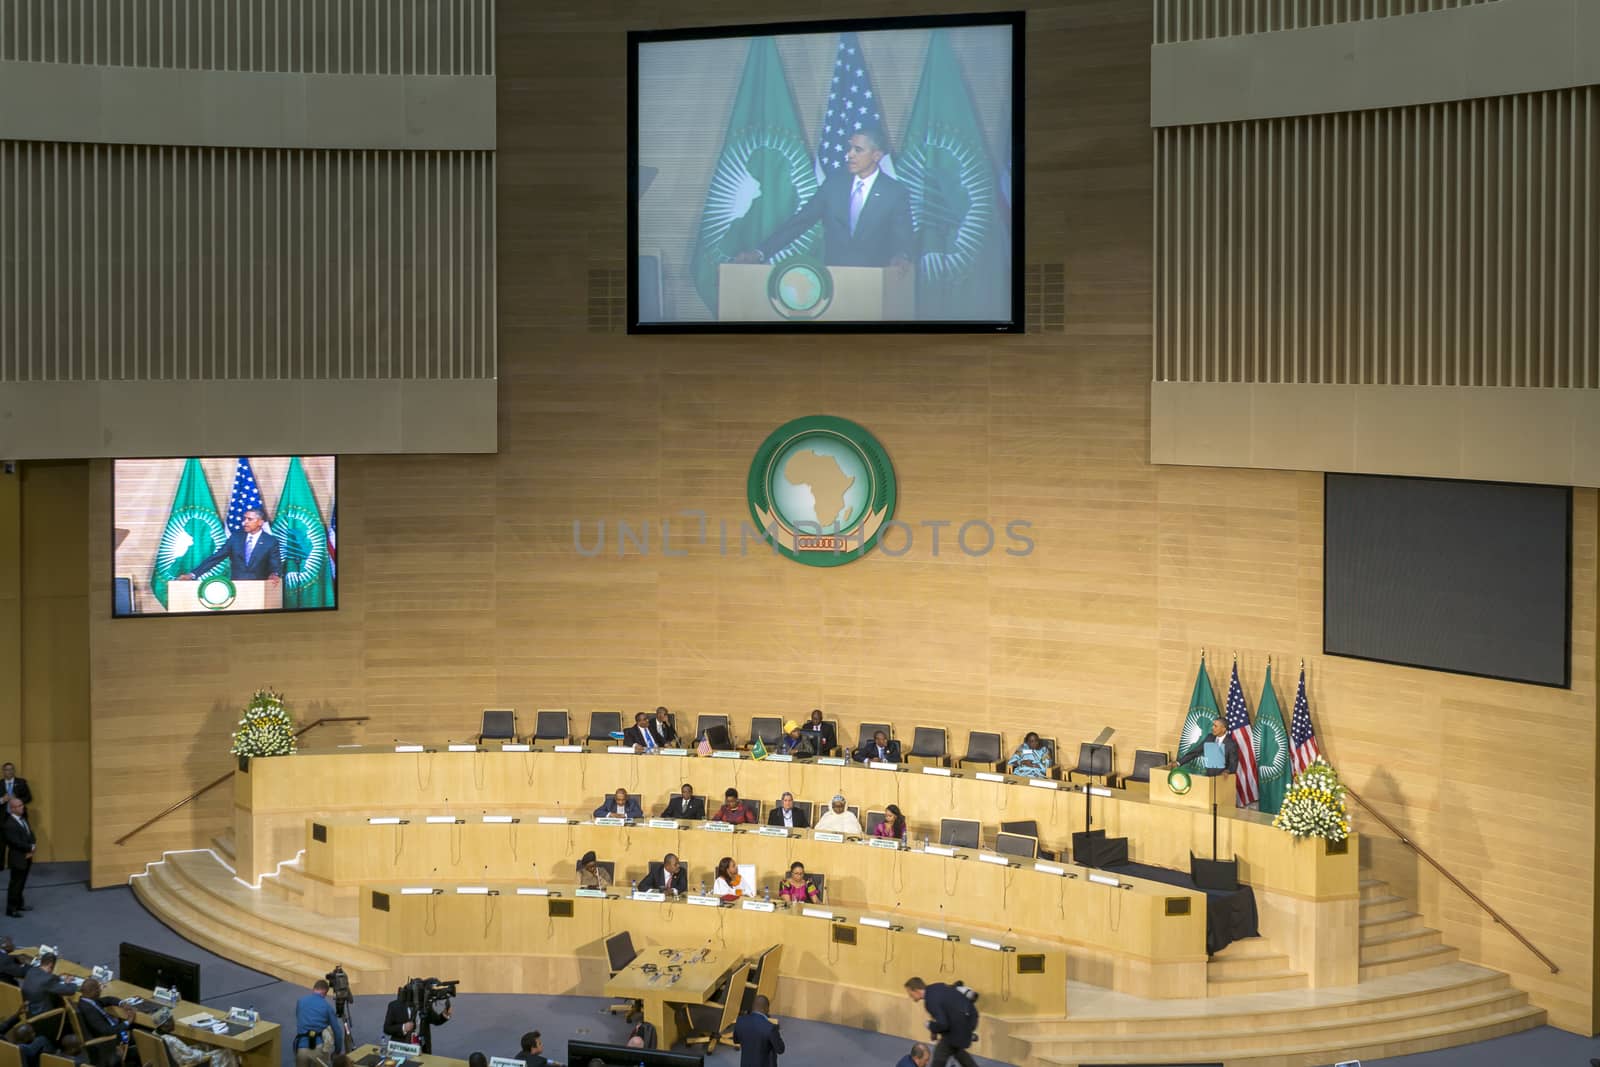 Addis Ababa - July 28: President Obama delivers a keynote speech to the African continent and its leaders, on July 28, 2015, at the Nelson Mandela Hall of the AU Conference Centre in Addis Ababa, Ethiopia.